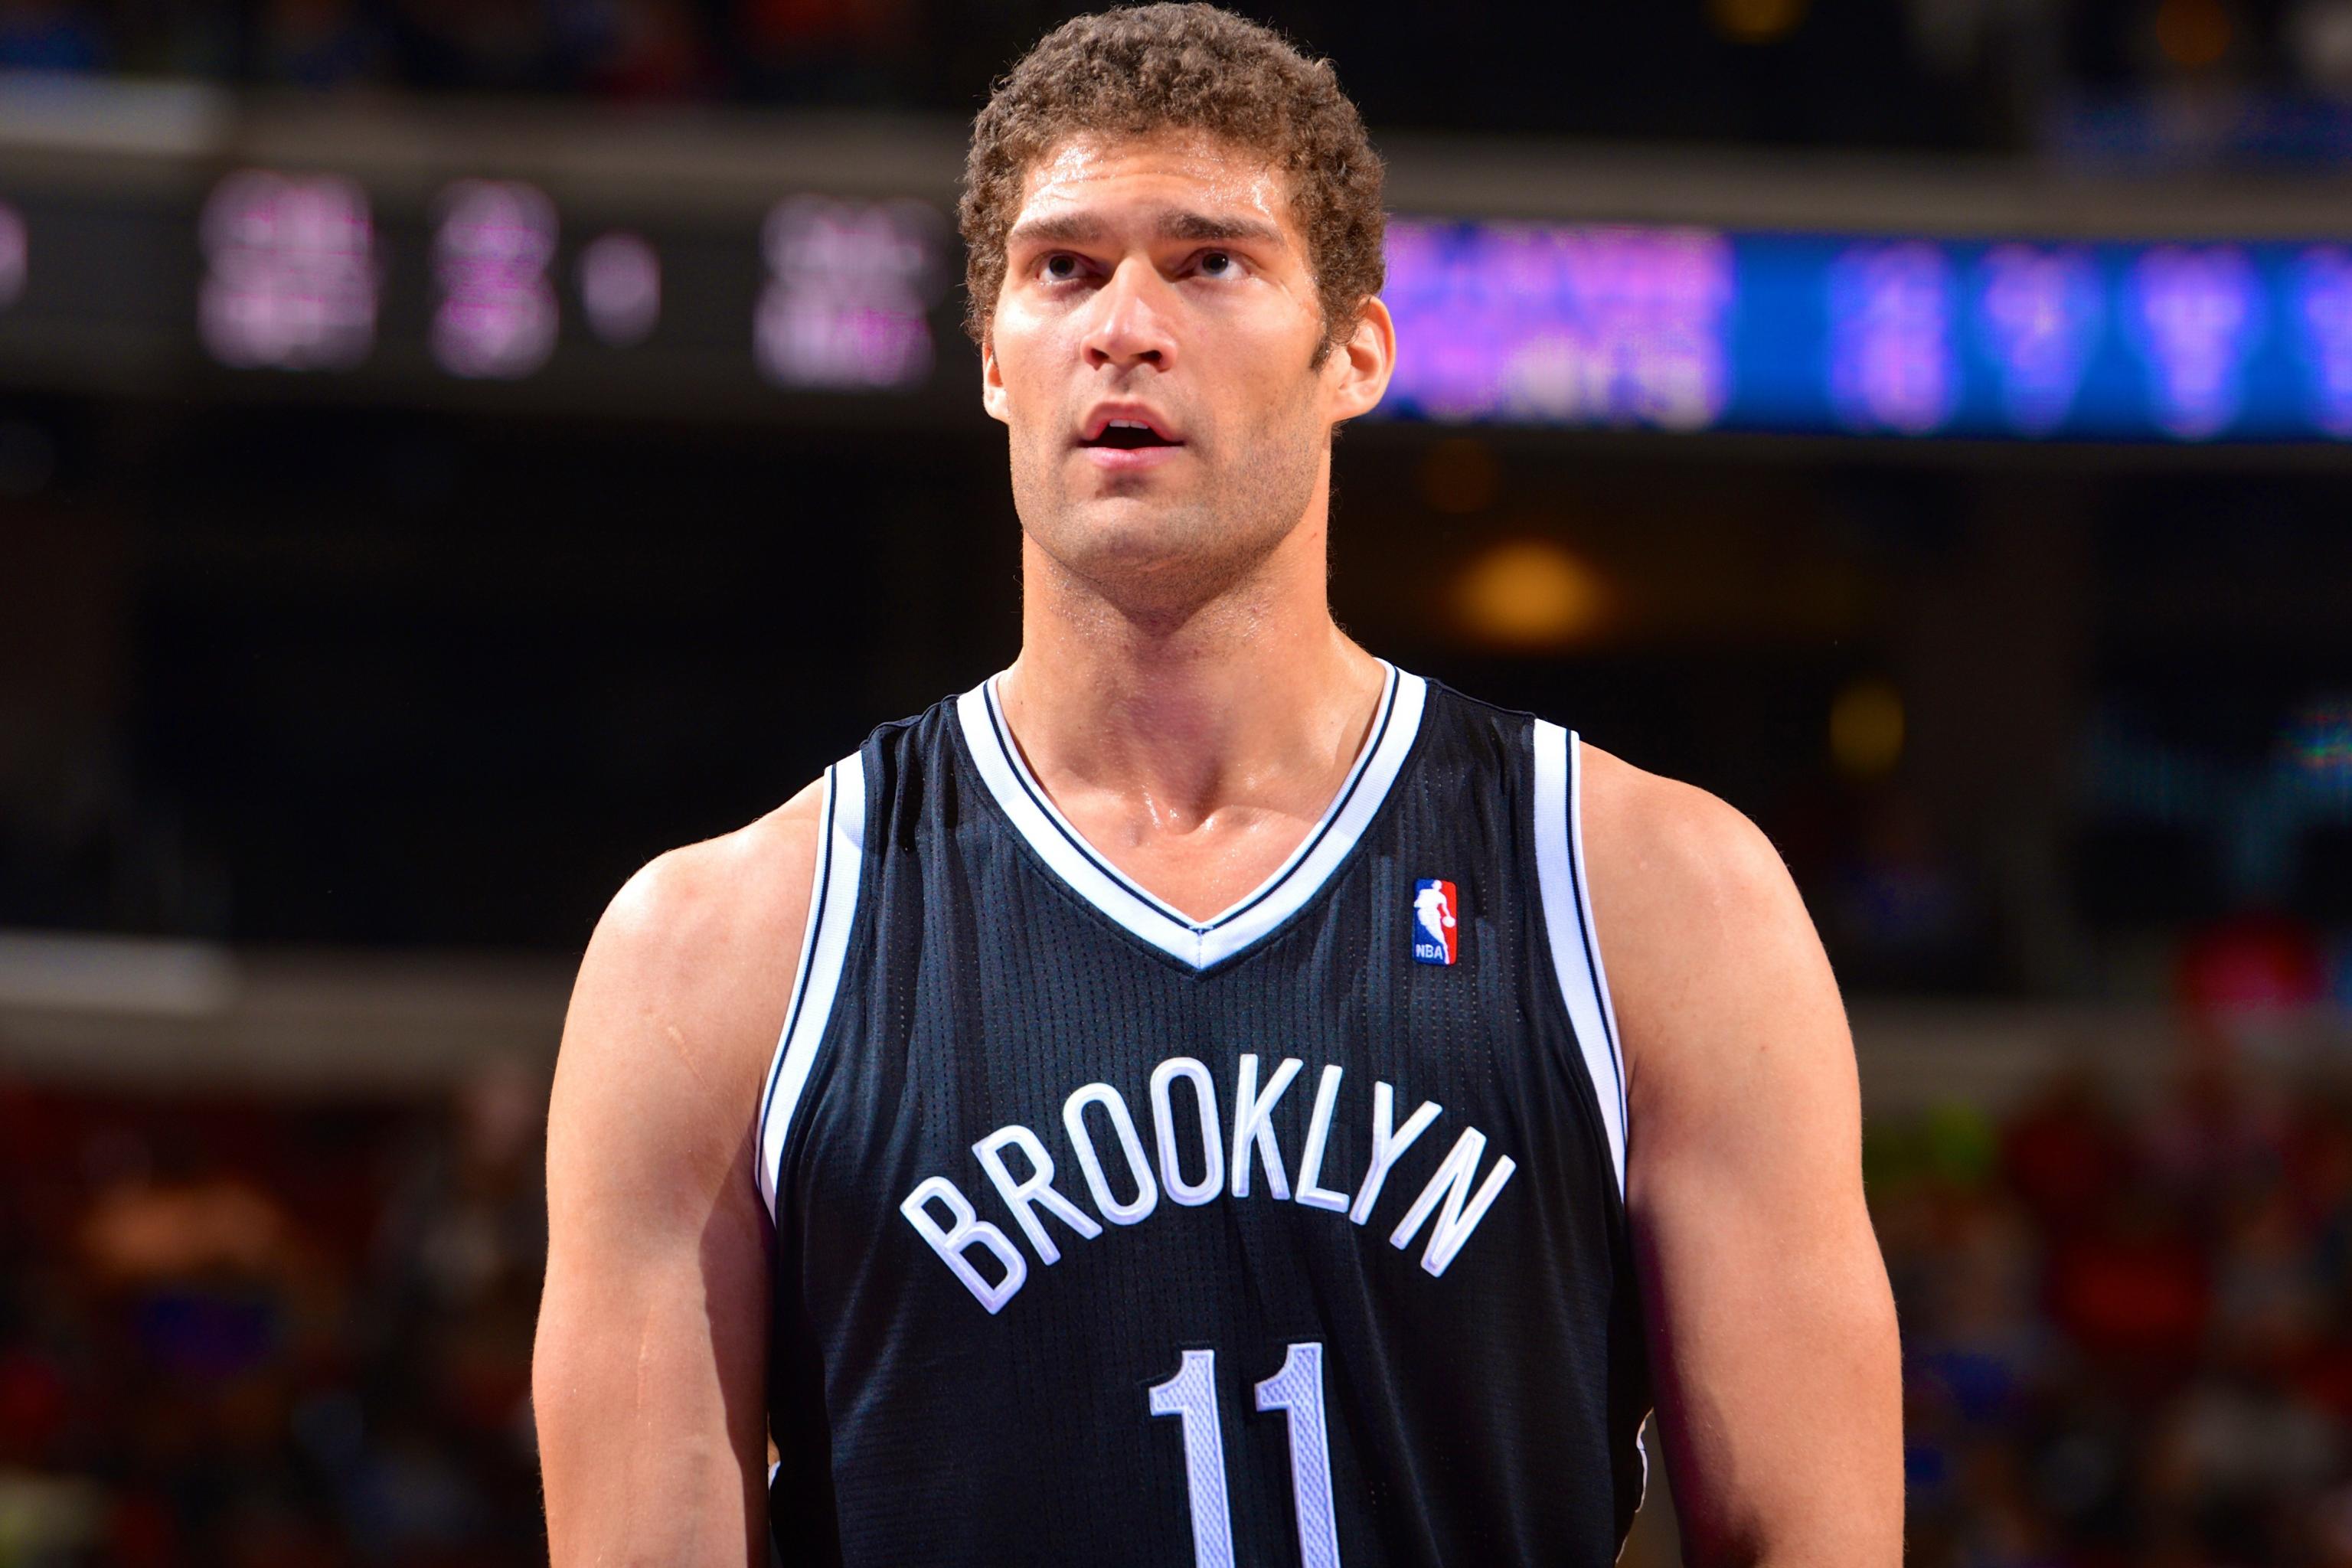 Do you guys think the Nets should retire number 11 for Brook Lopez